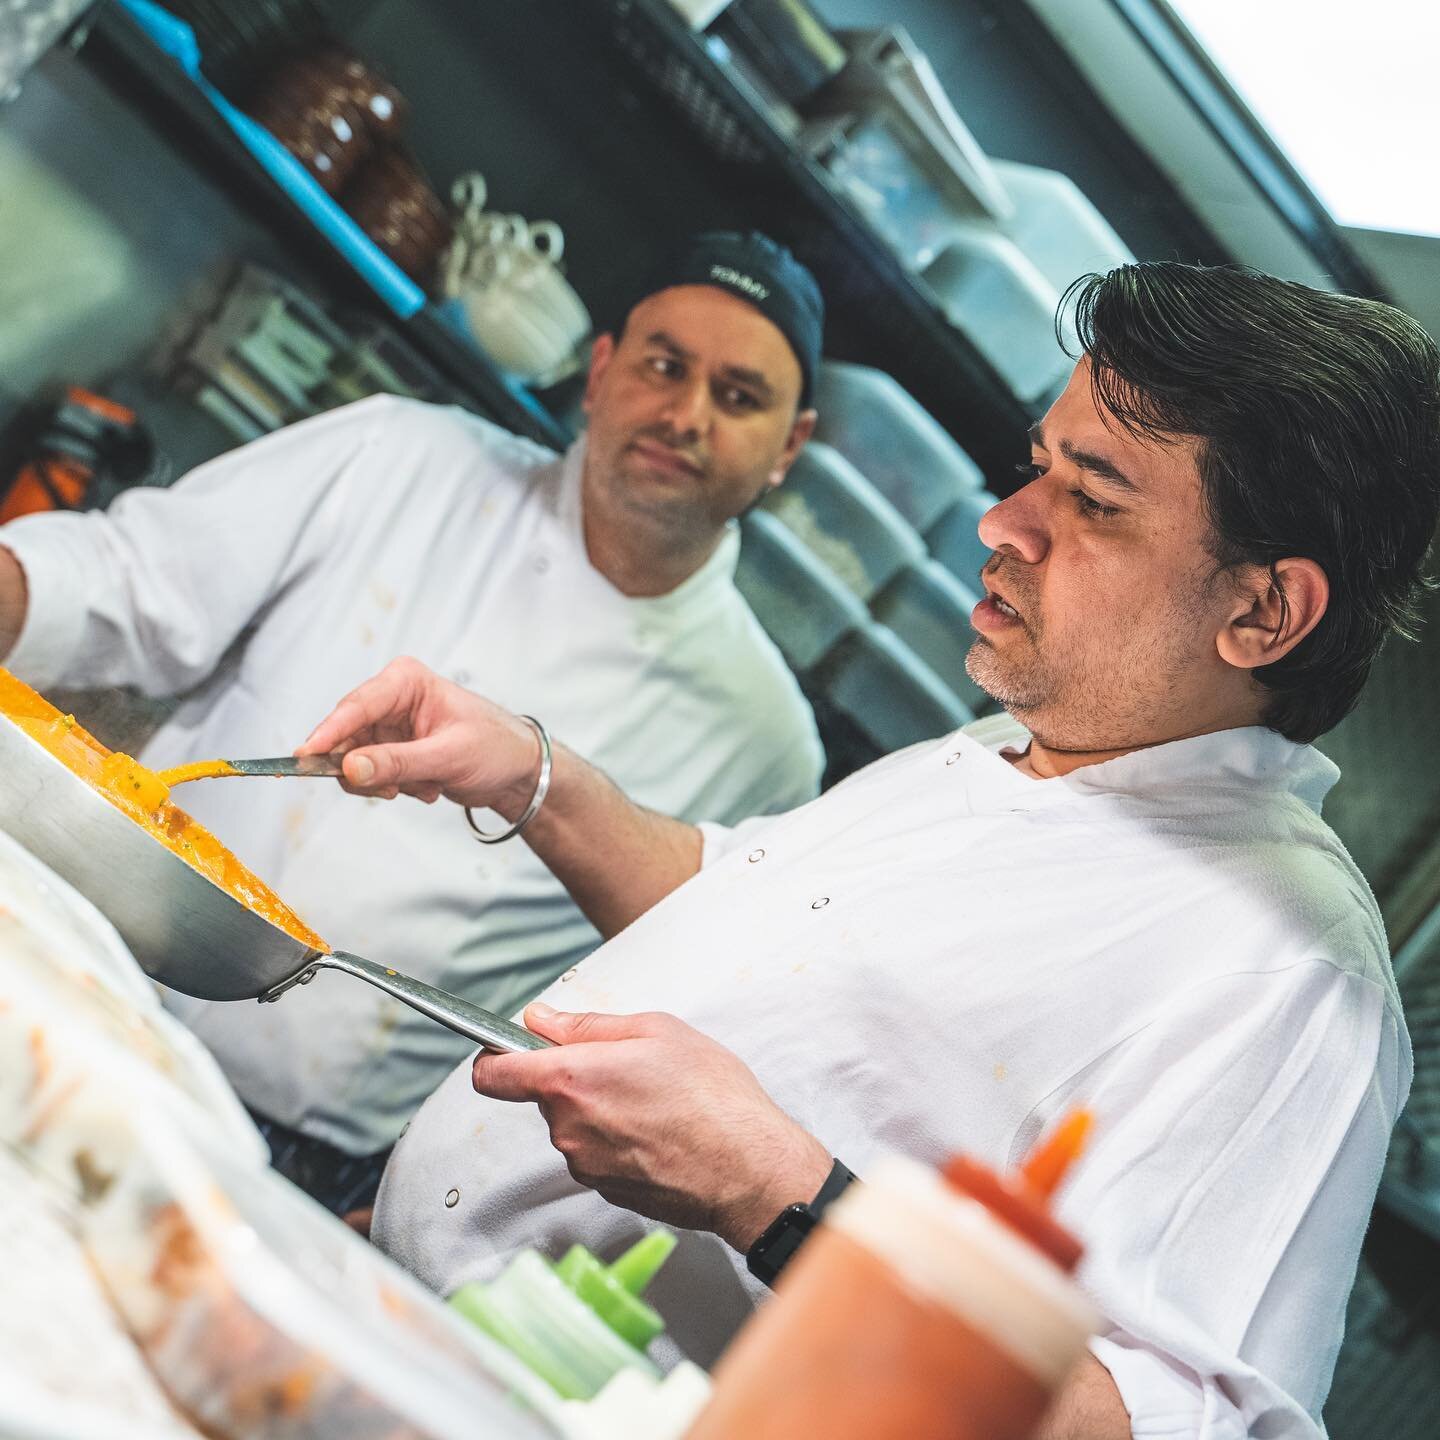 Michelin and AA rosette recommended authentic Indian restaurant @dastaan447 behind the scenes. Prep for a video production underway. A flavour and dining experience like no other, pleasure watching the chefs at work.
.
.
.
@epsomliving @thatsurreylif